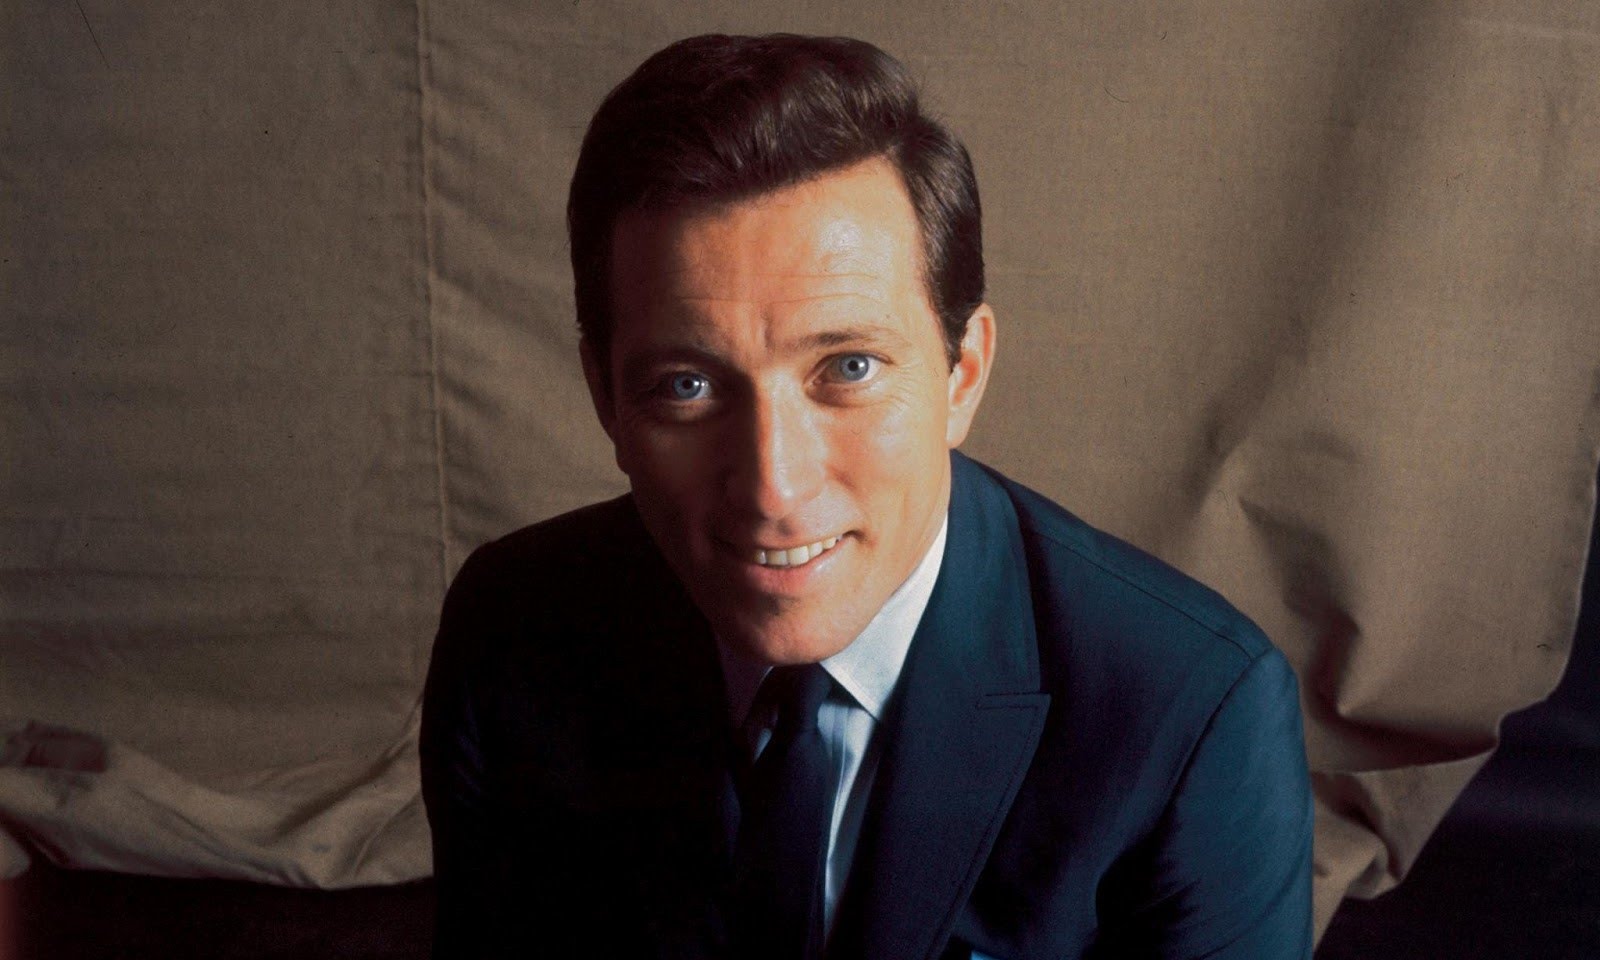 ANDY WILLIAMS - HOLIDAY SONGS 1004